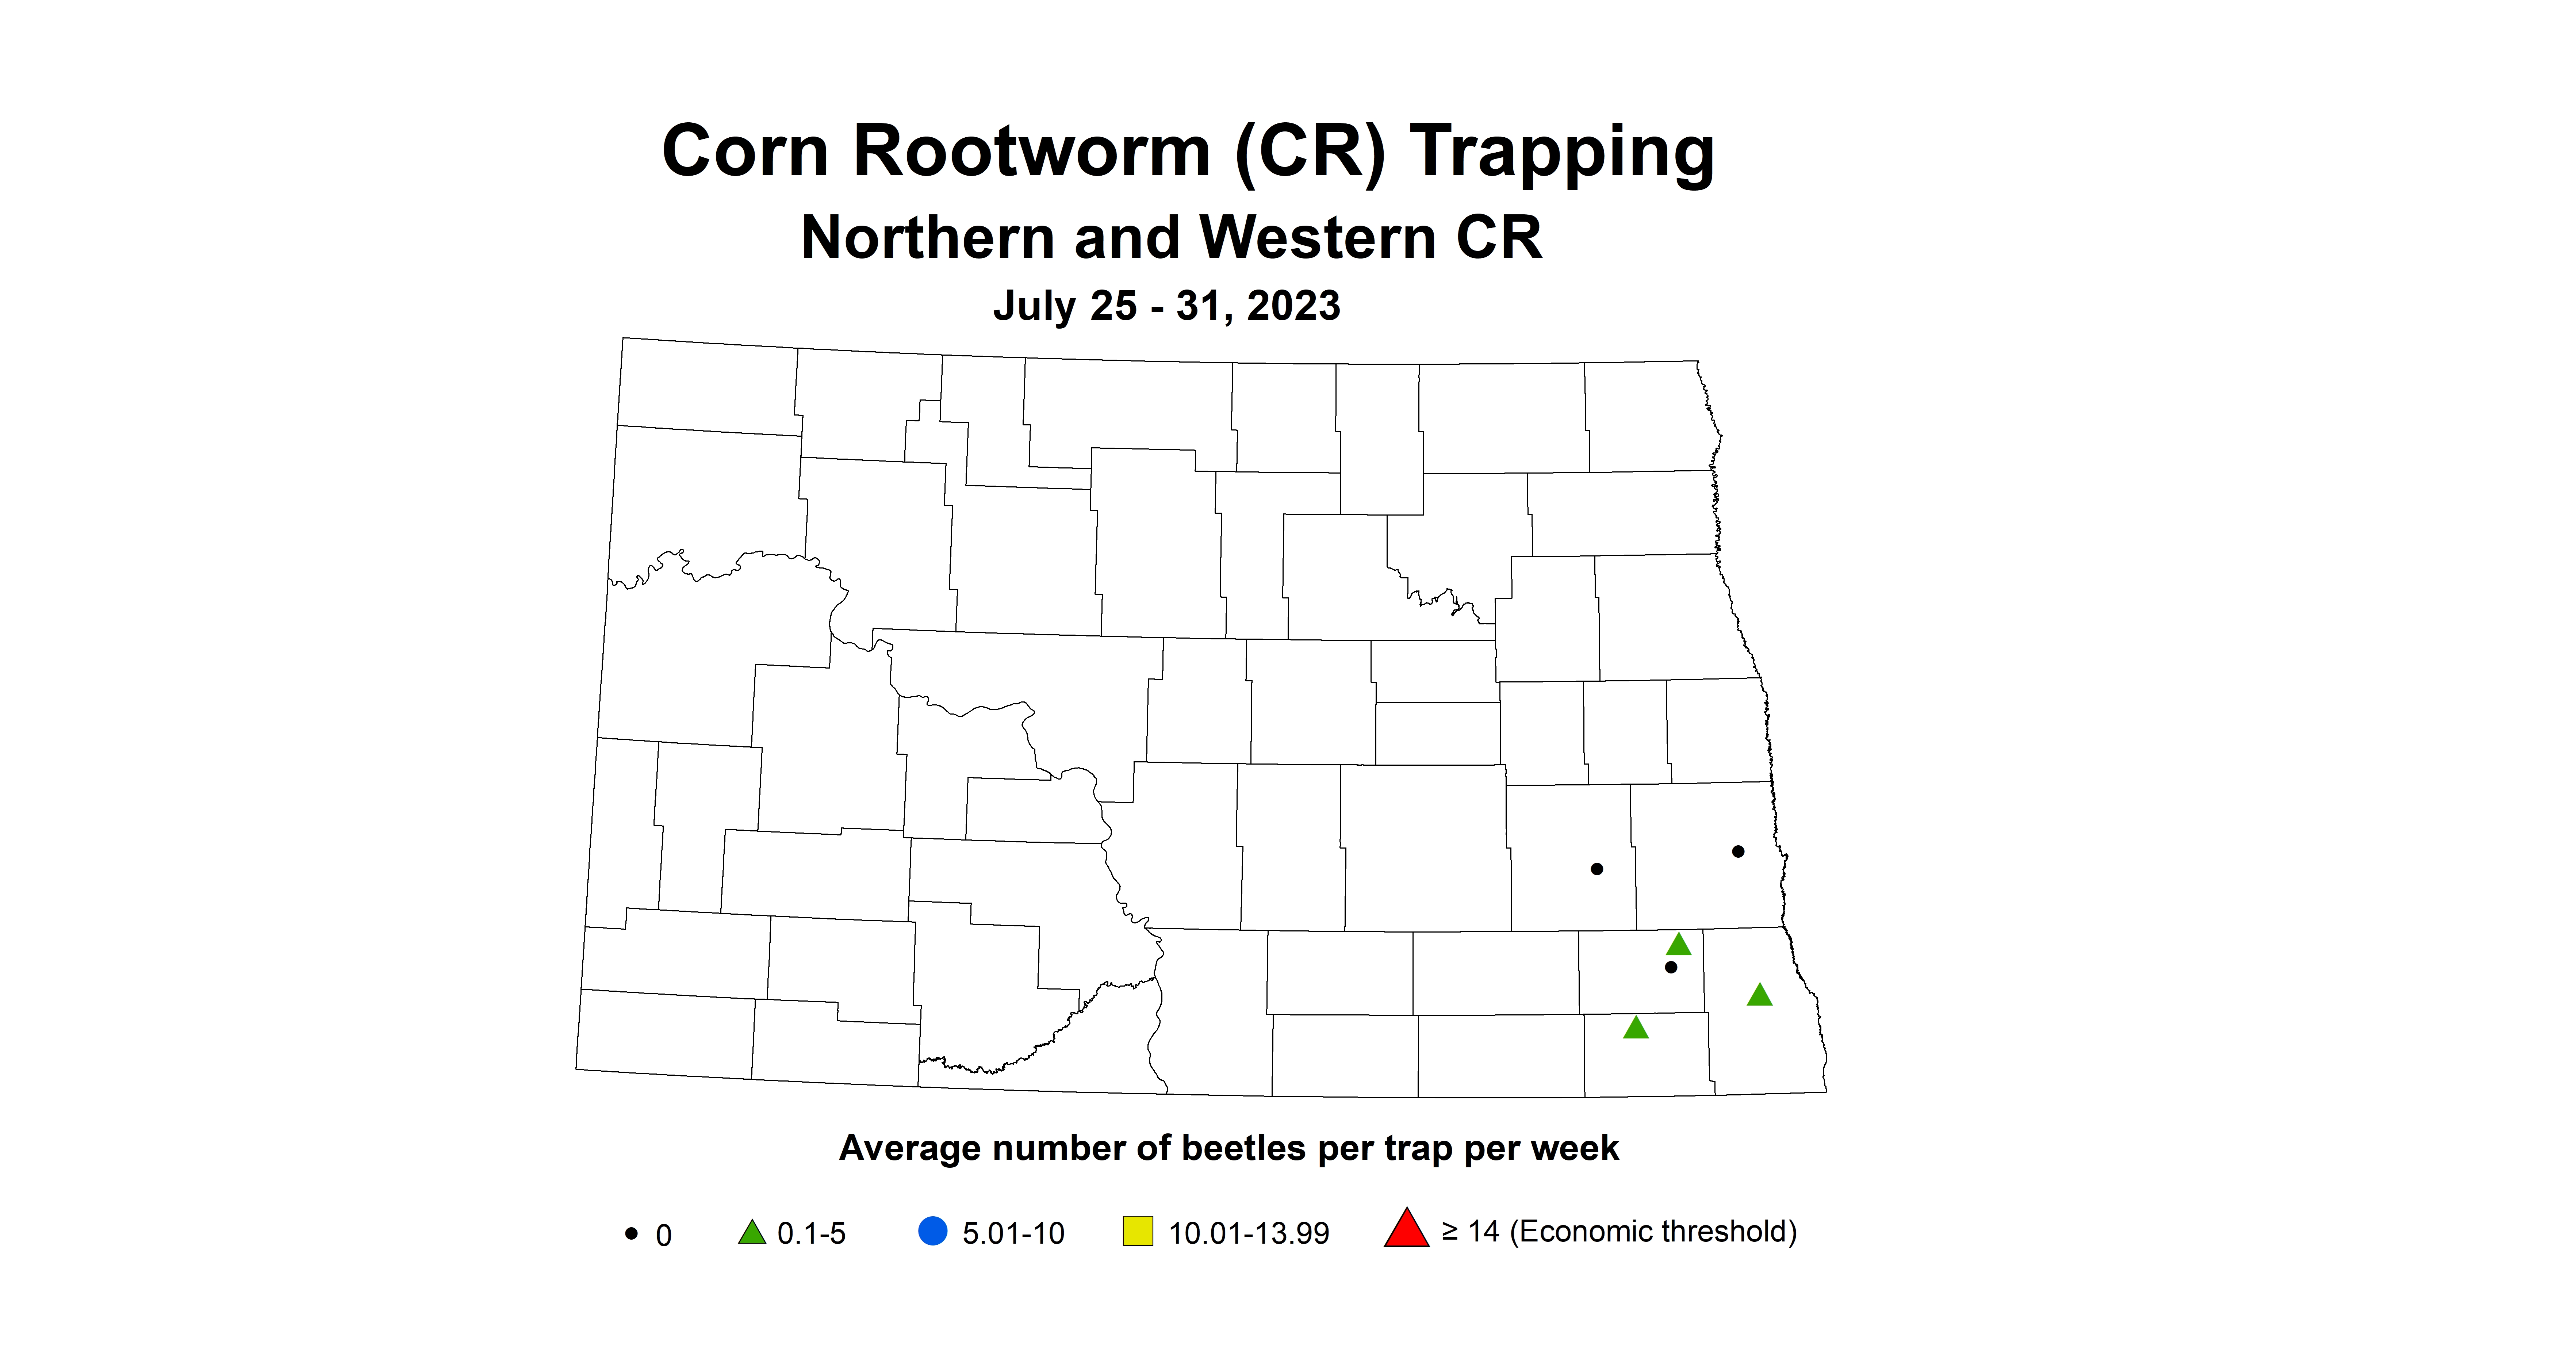 northern and western corn rootworm July 25-31 2023